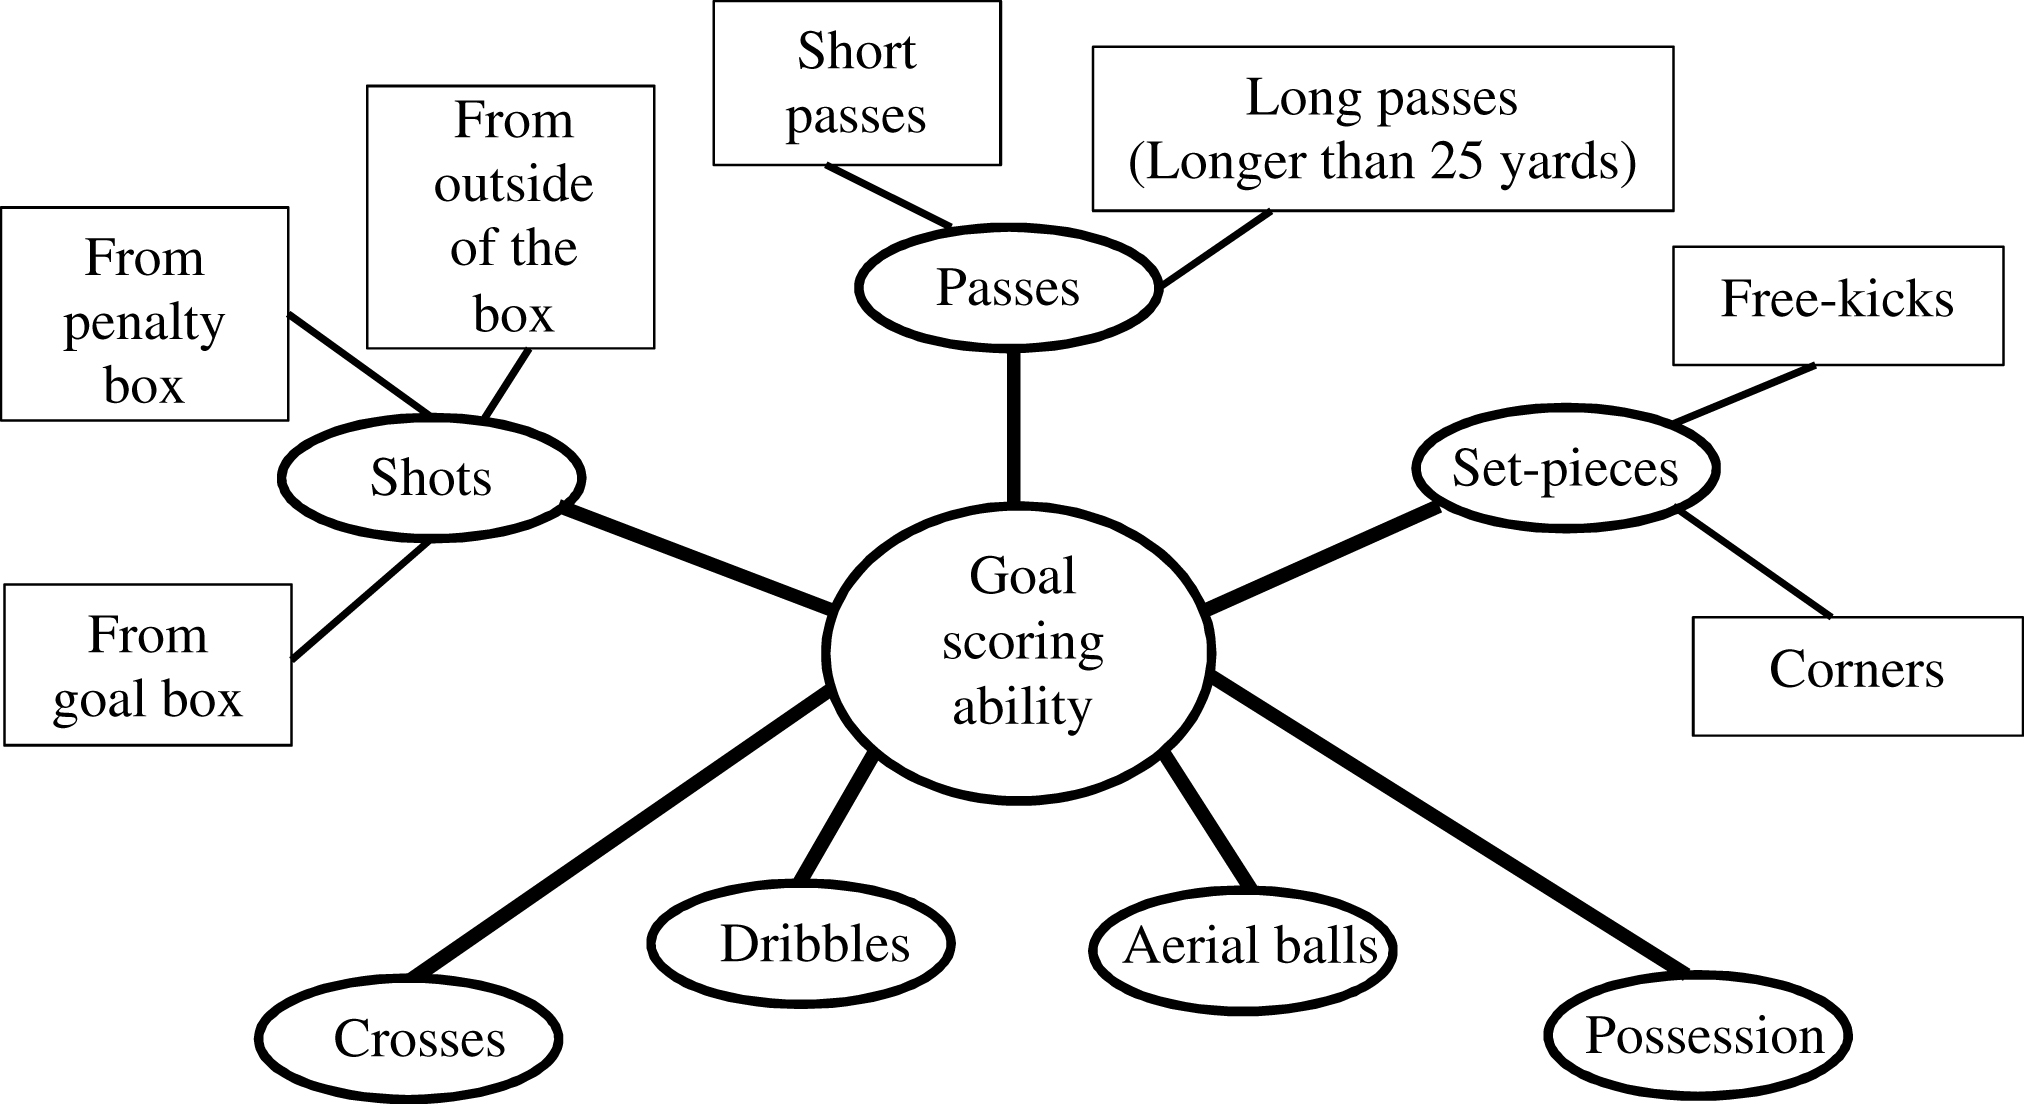 Pitch actions that create goal scoring opportunities.